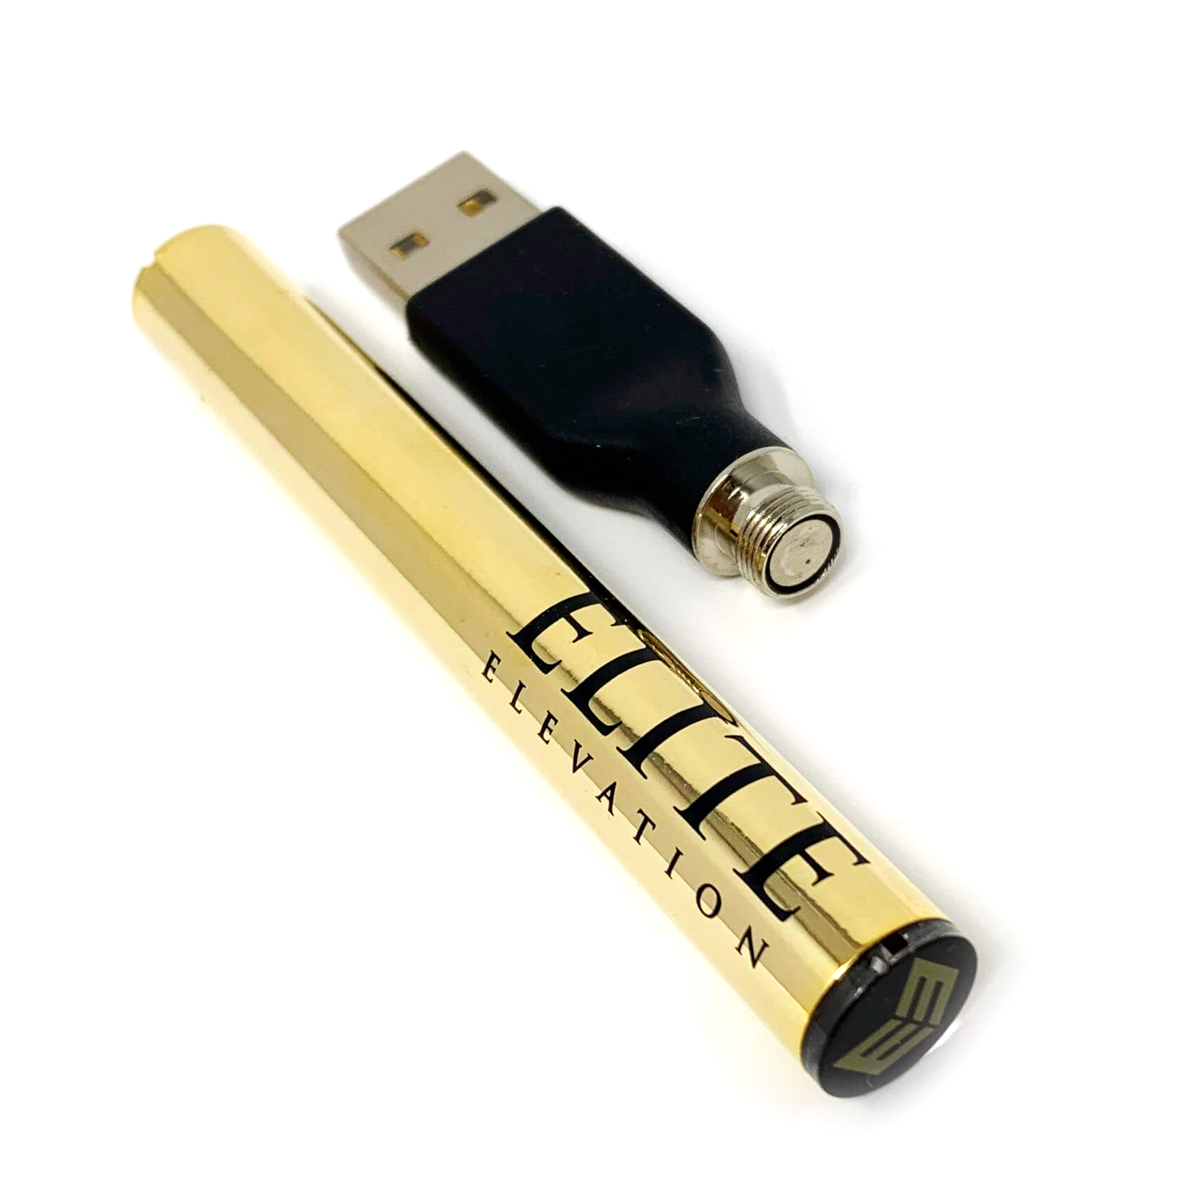 Buy Elite Elevation Vape Battery And Charger